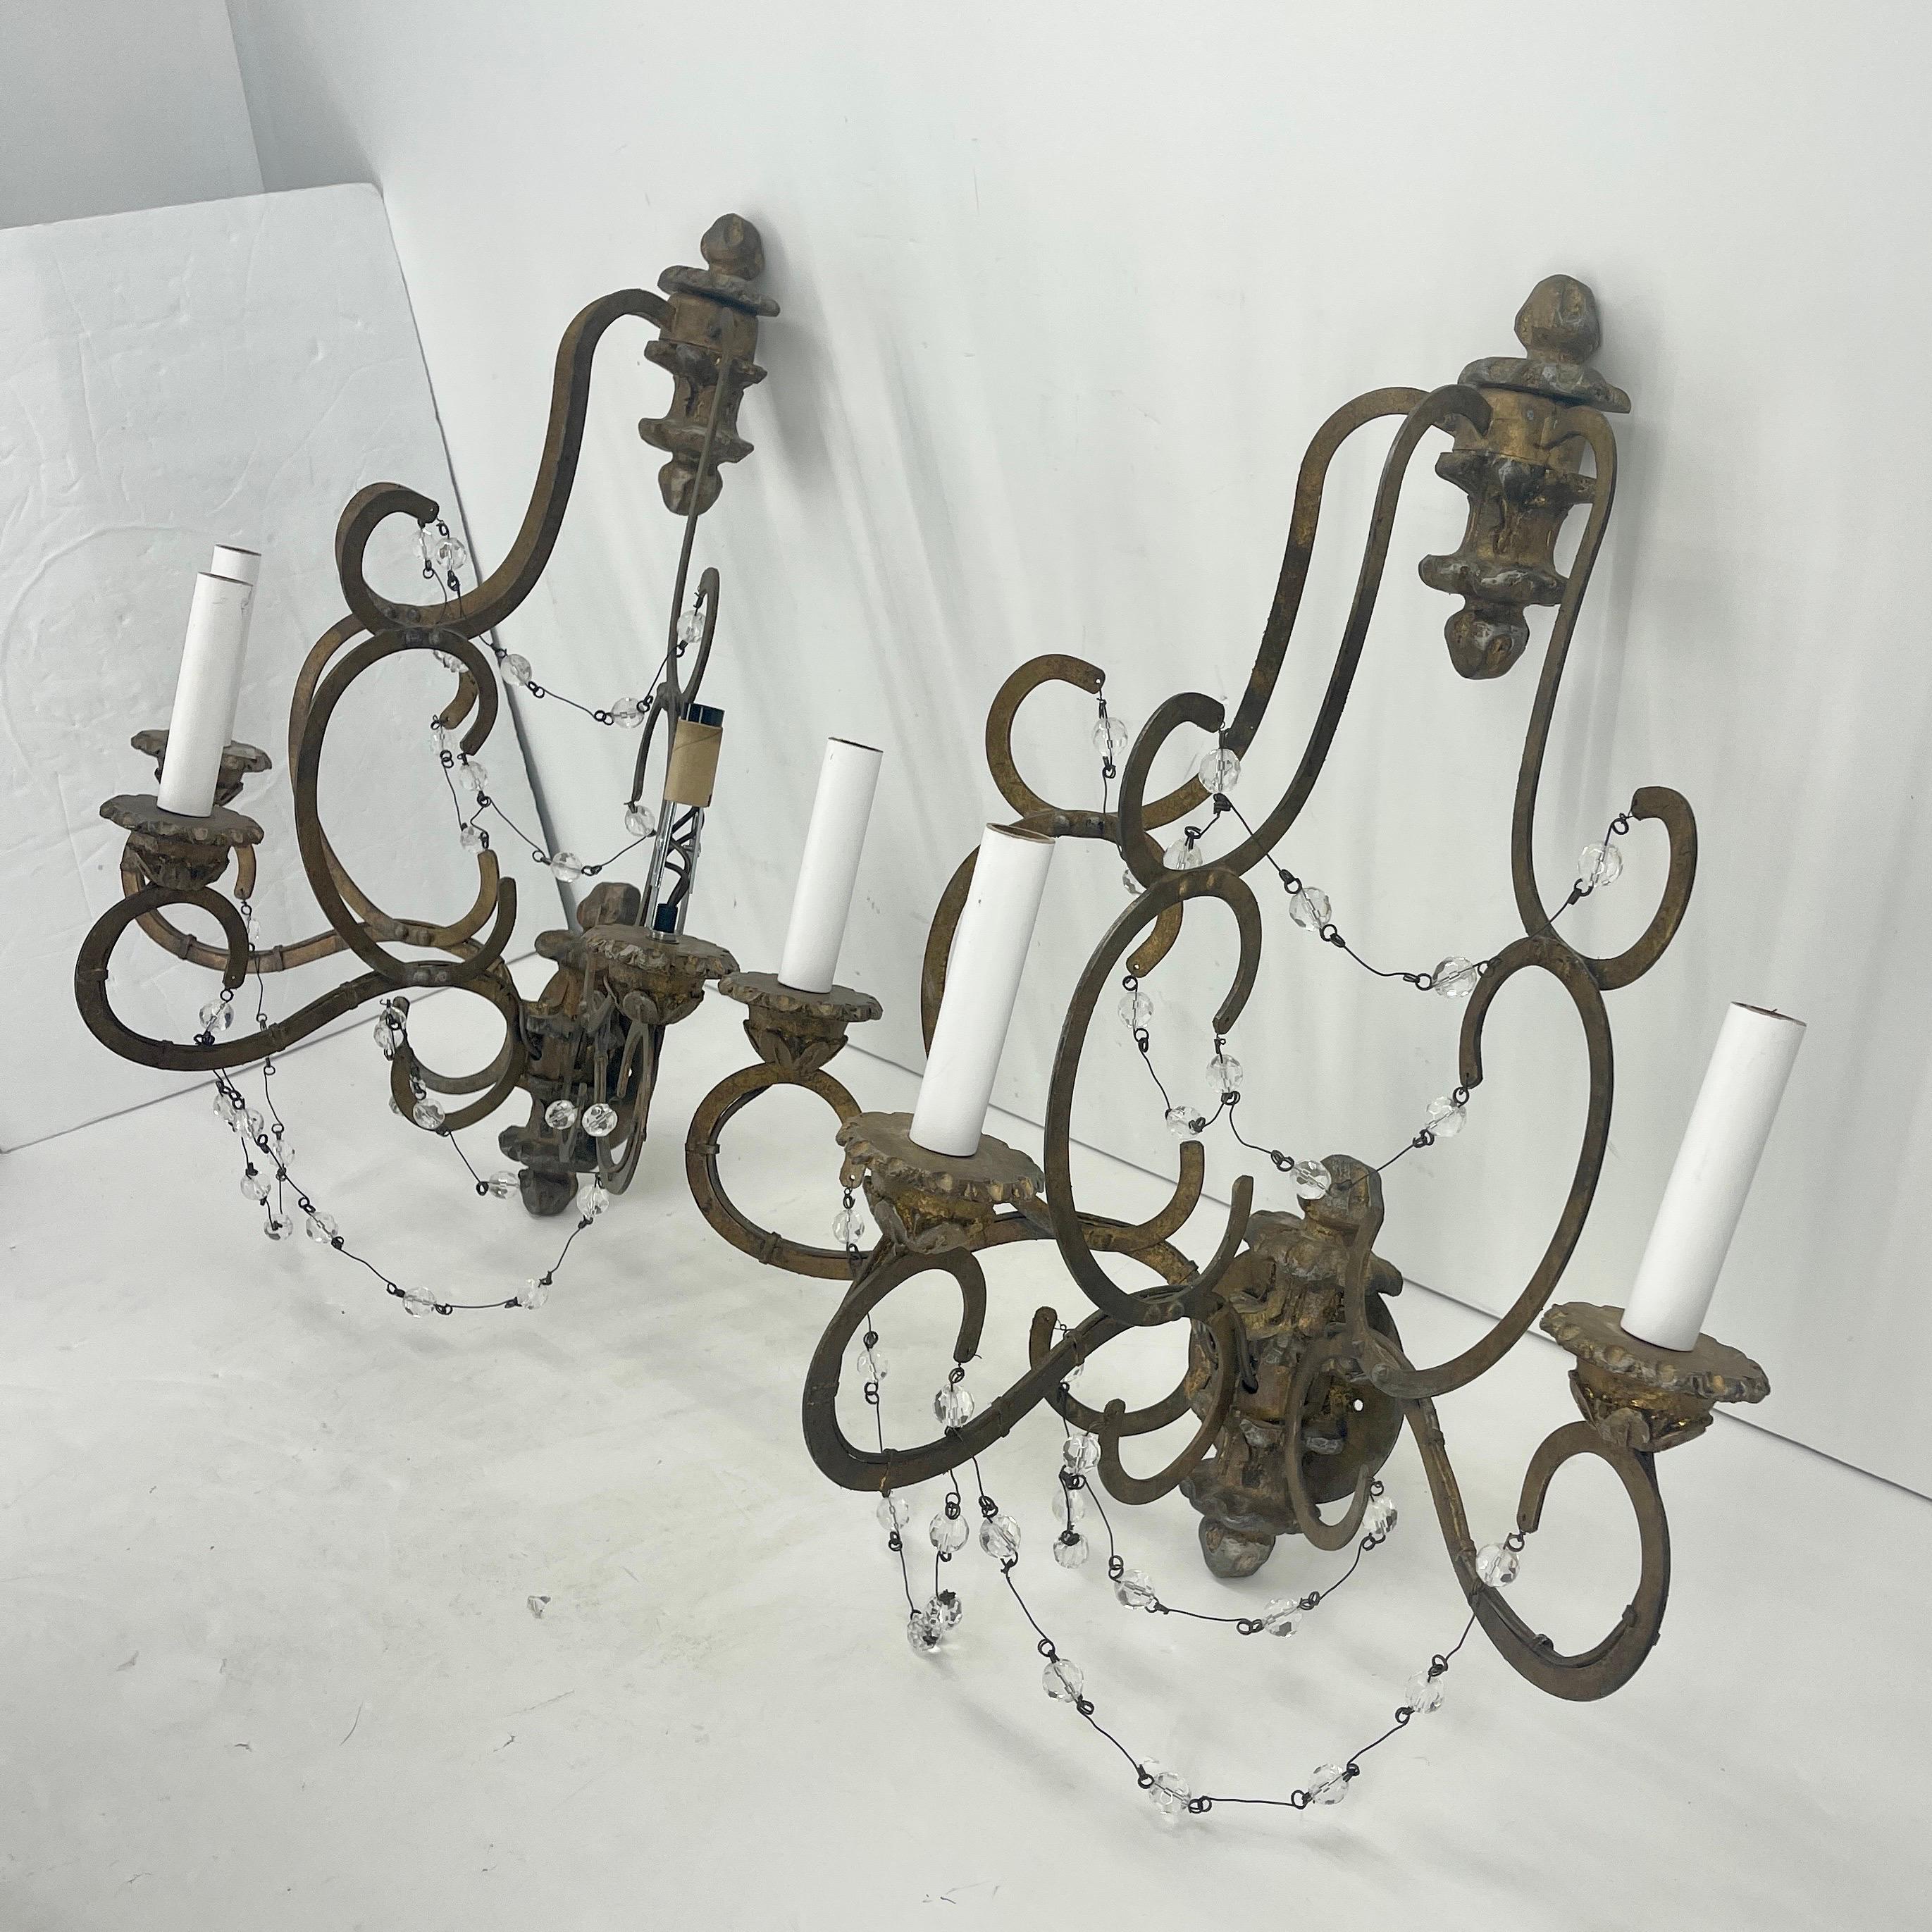 Pair of Avignon 3 Light Wall Sconces by Niermann Weeks 1